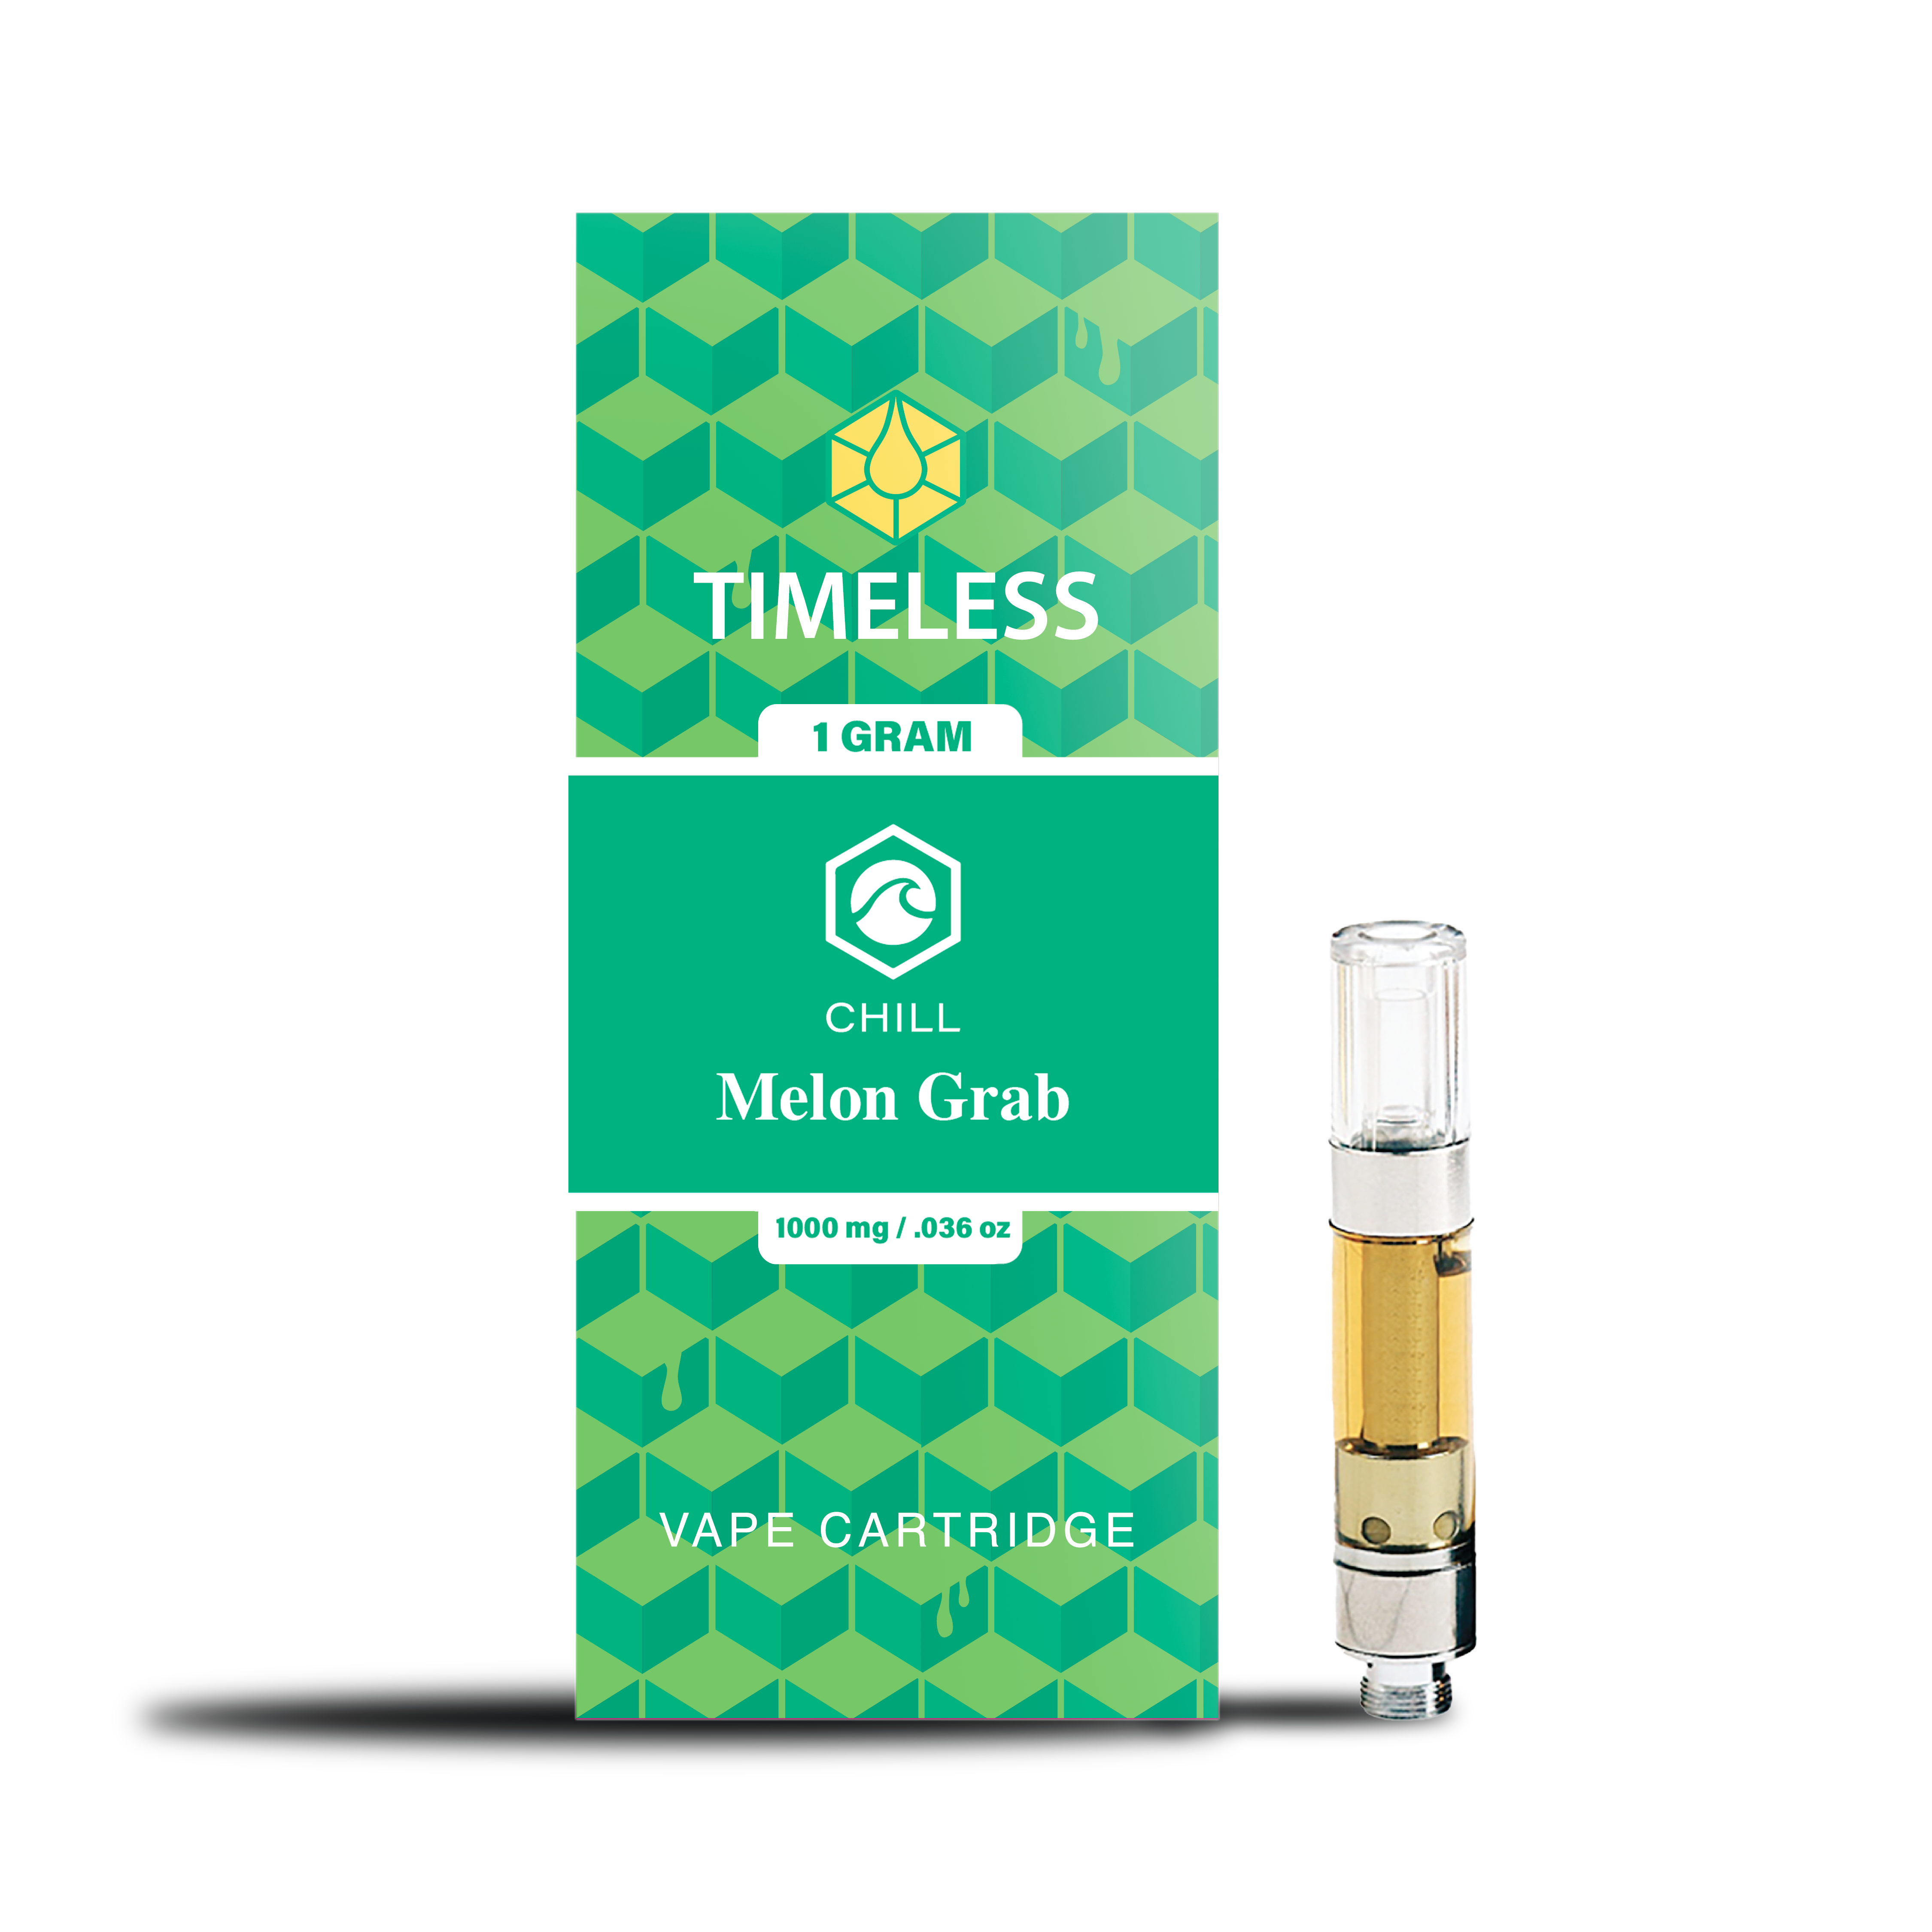 A photograph of Timeless Cartridge (Chill) 1g Melon Grab